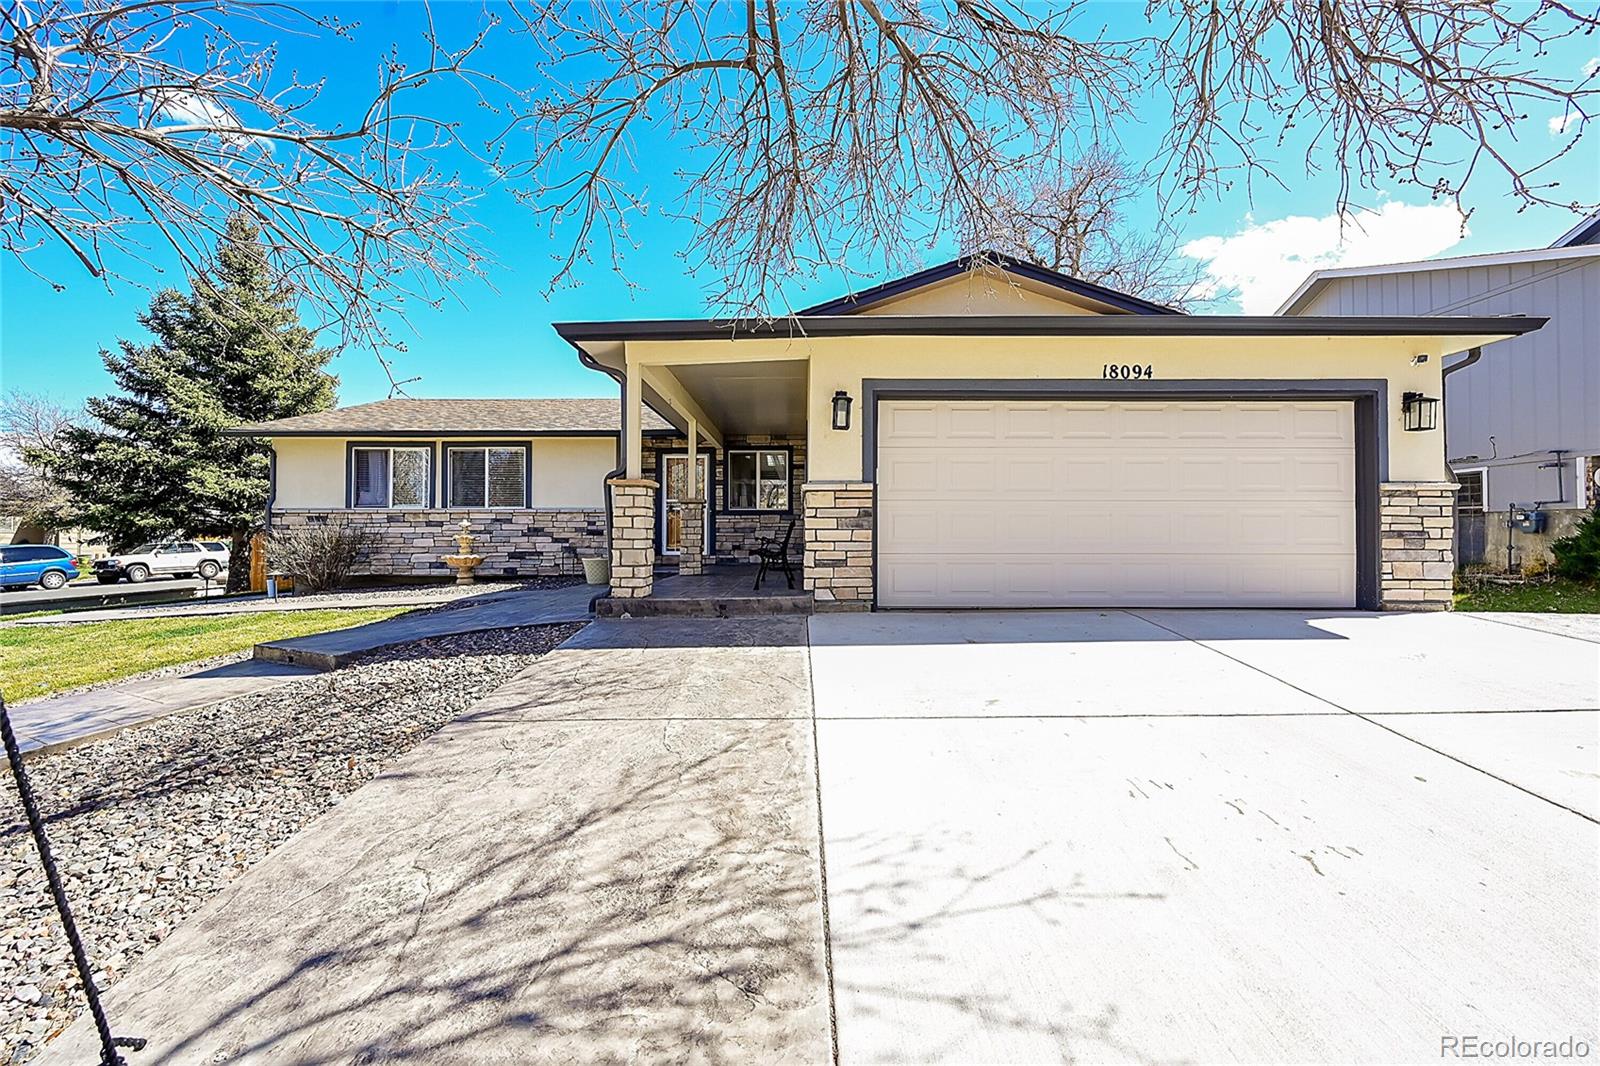 18094 e ford place, Aurora sold home. Closed on 2024-06-05 for $550,000.